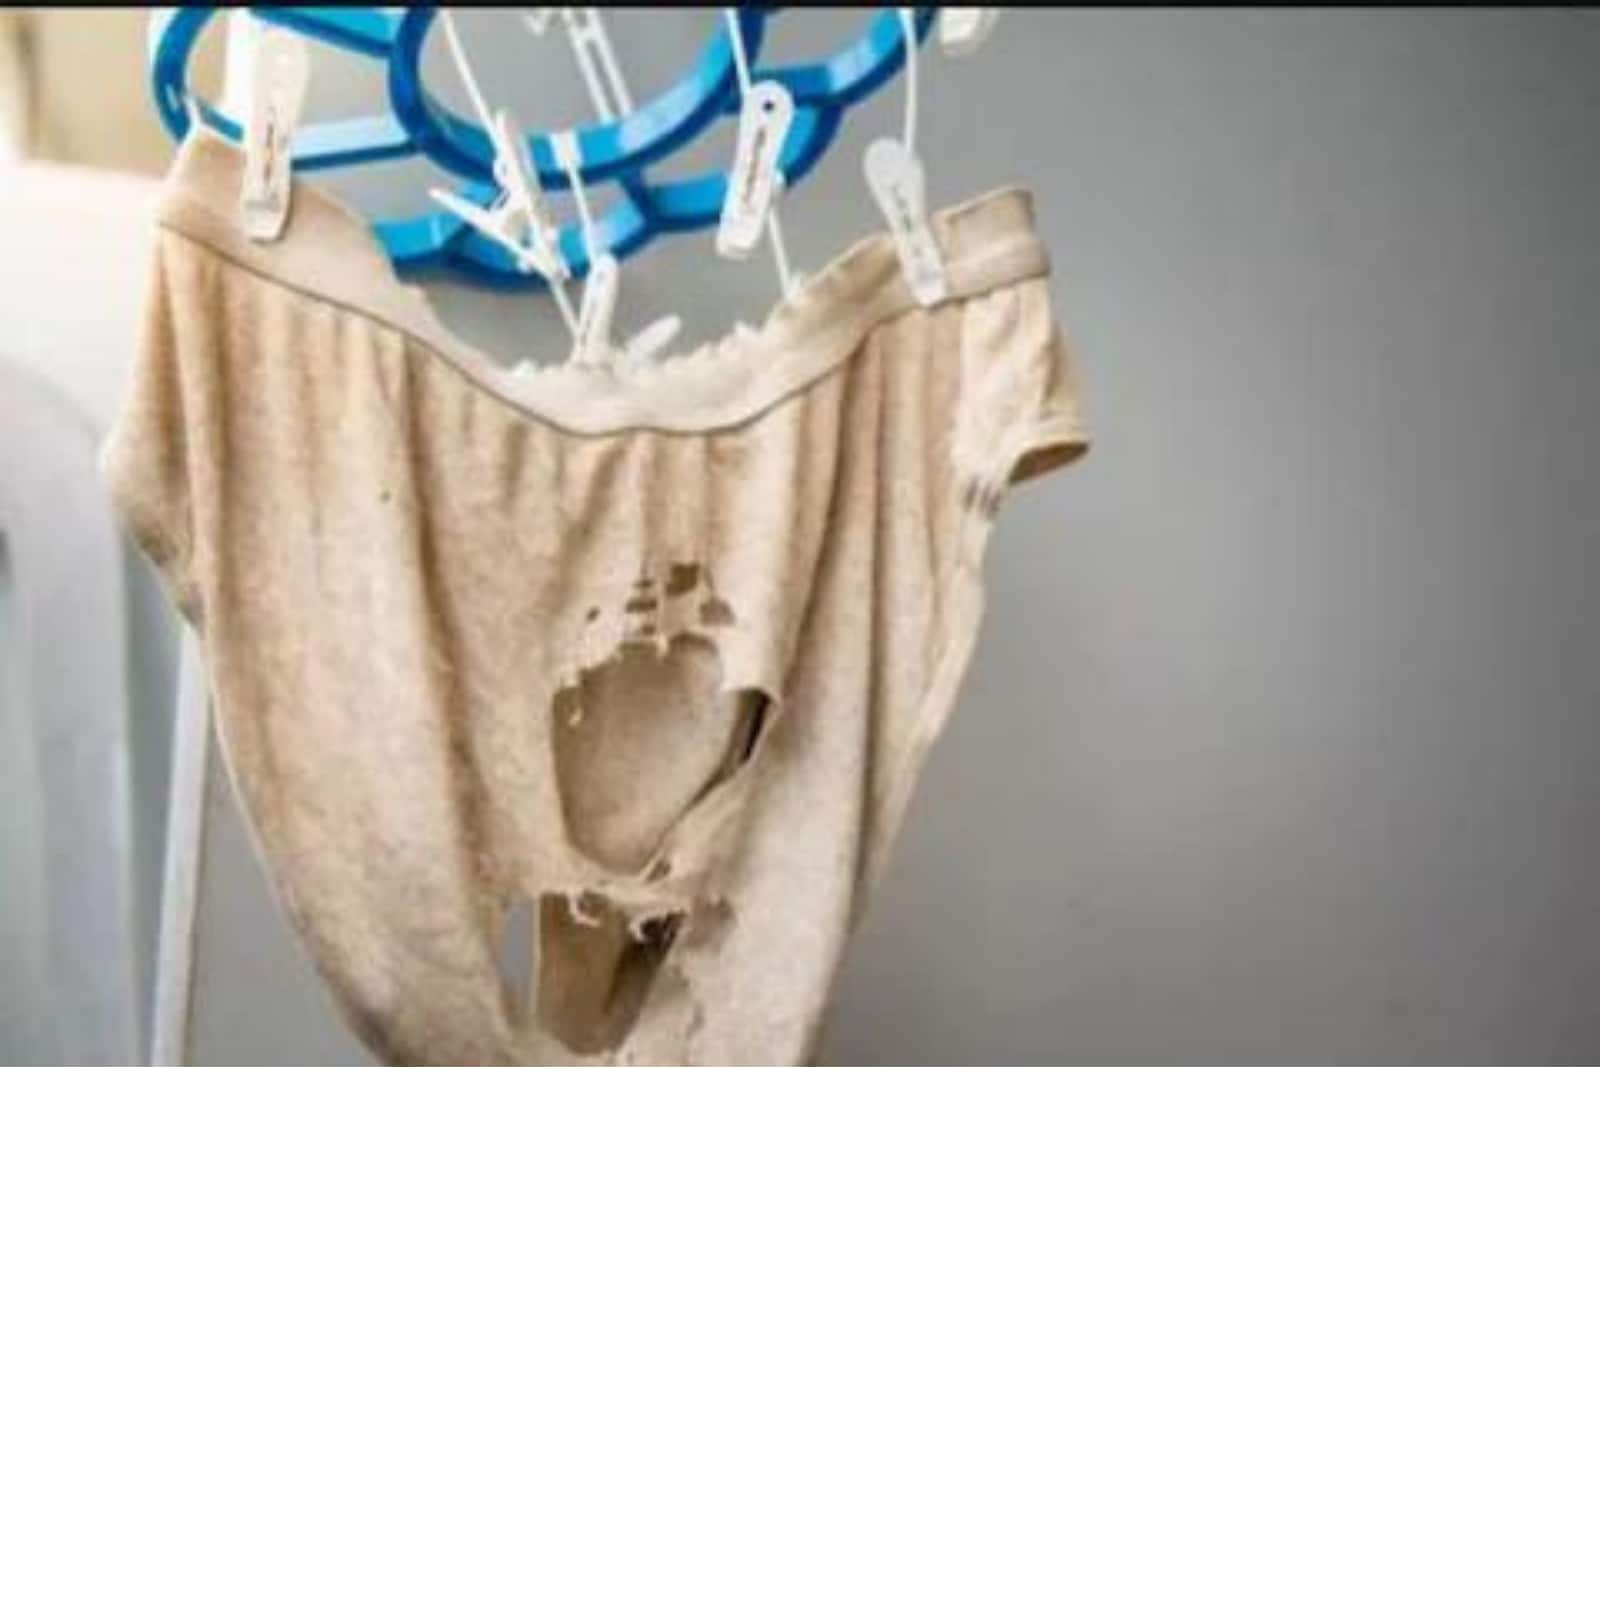 Do Undergarments Have an Expiry Date? Experts Answer - News18